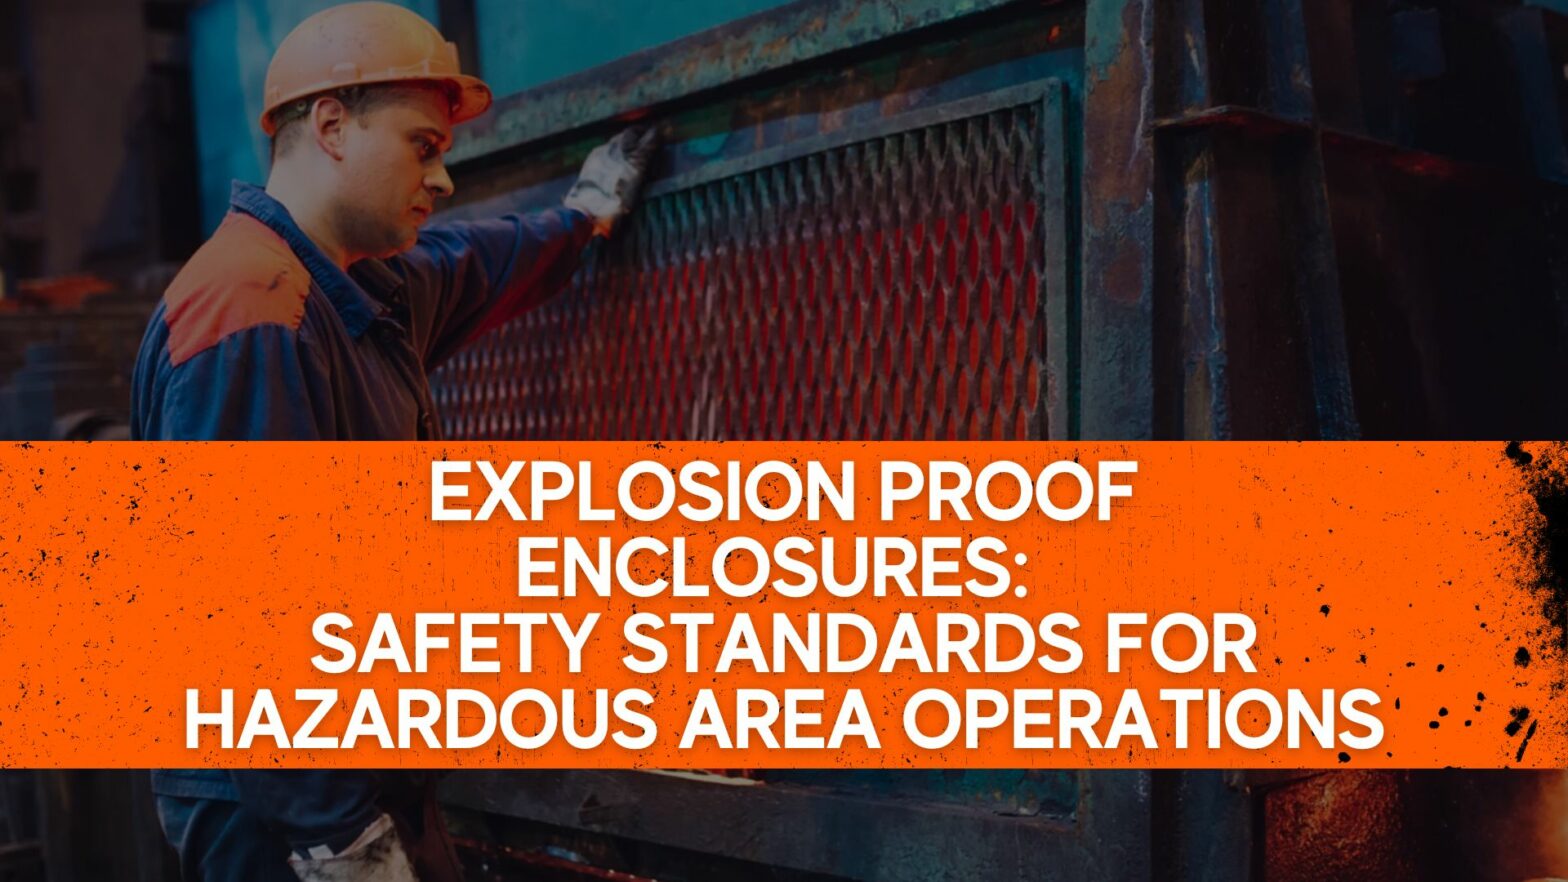 Explosion Proof Enclosures: Safety Standards for Hazardous Area Operations